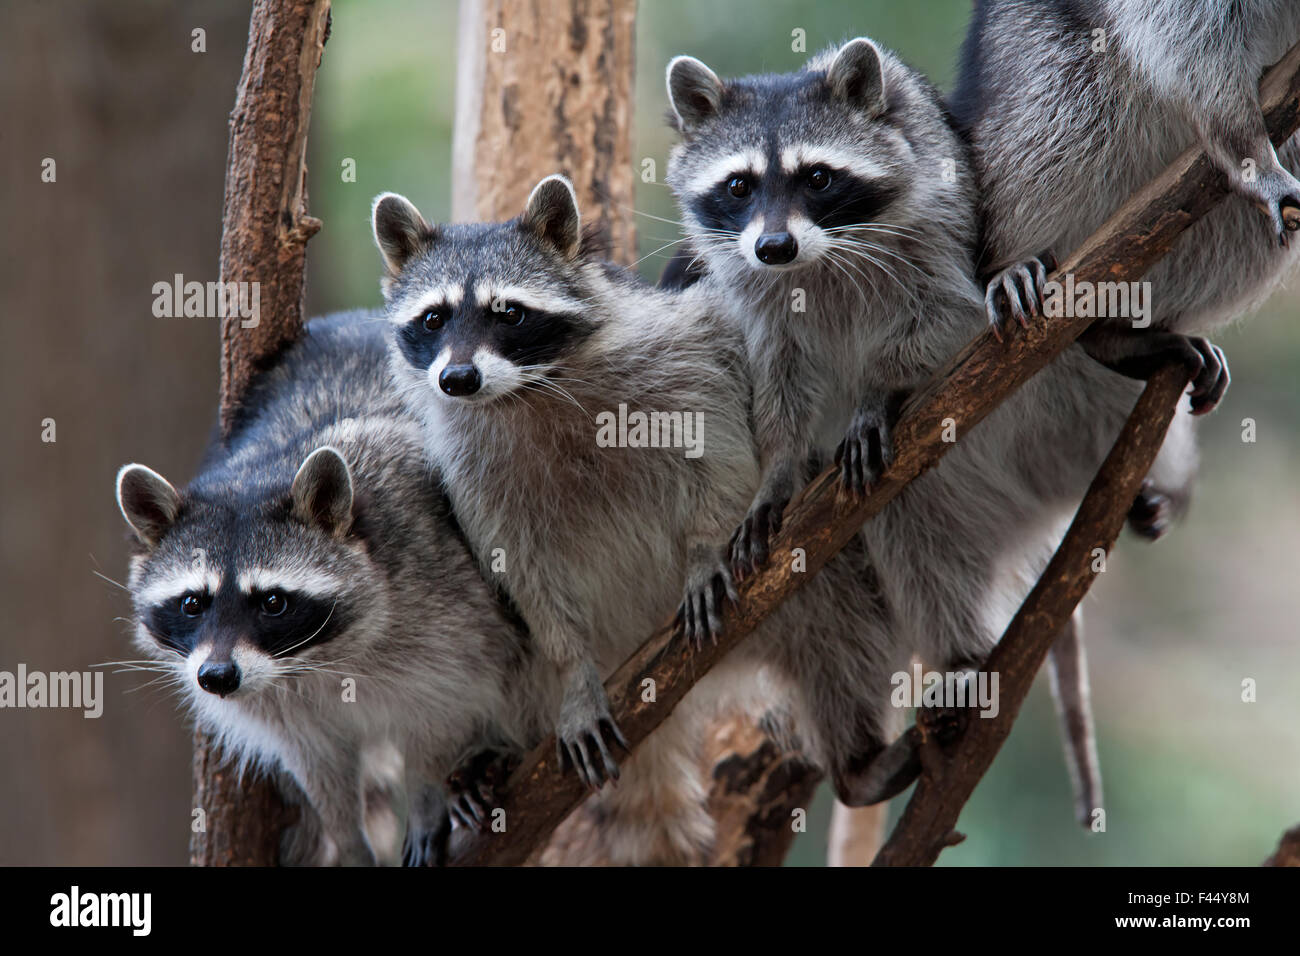 Northern raccoon (Procyon lotor), group standing on branch, captive. Stock Photo